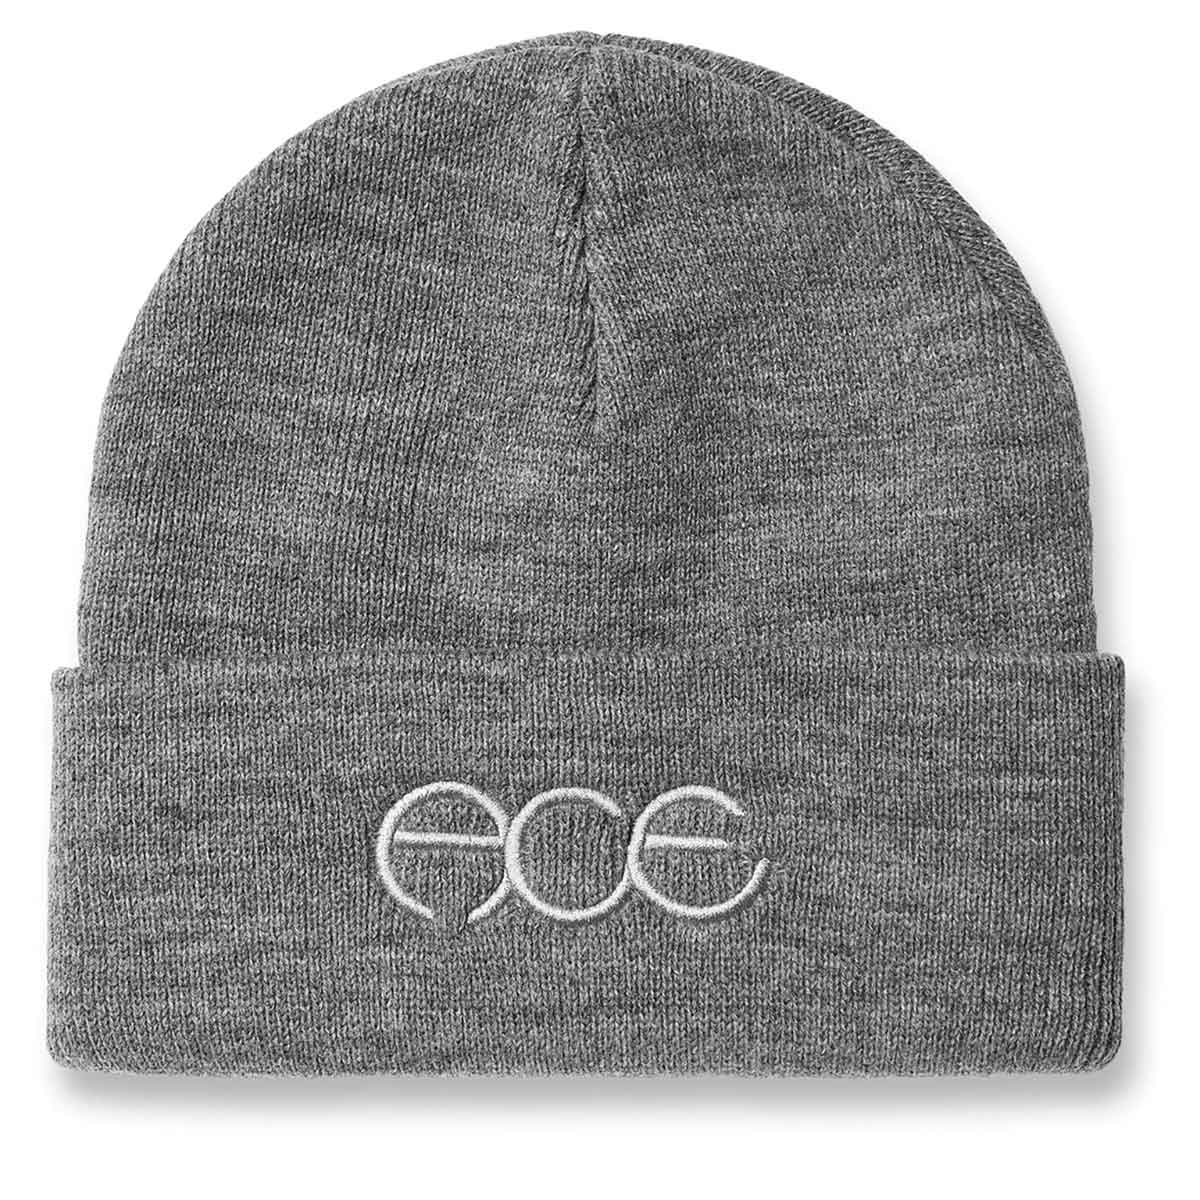 Ace Rings Beanie Charcoal